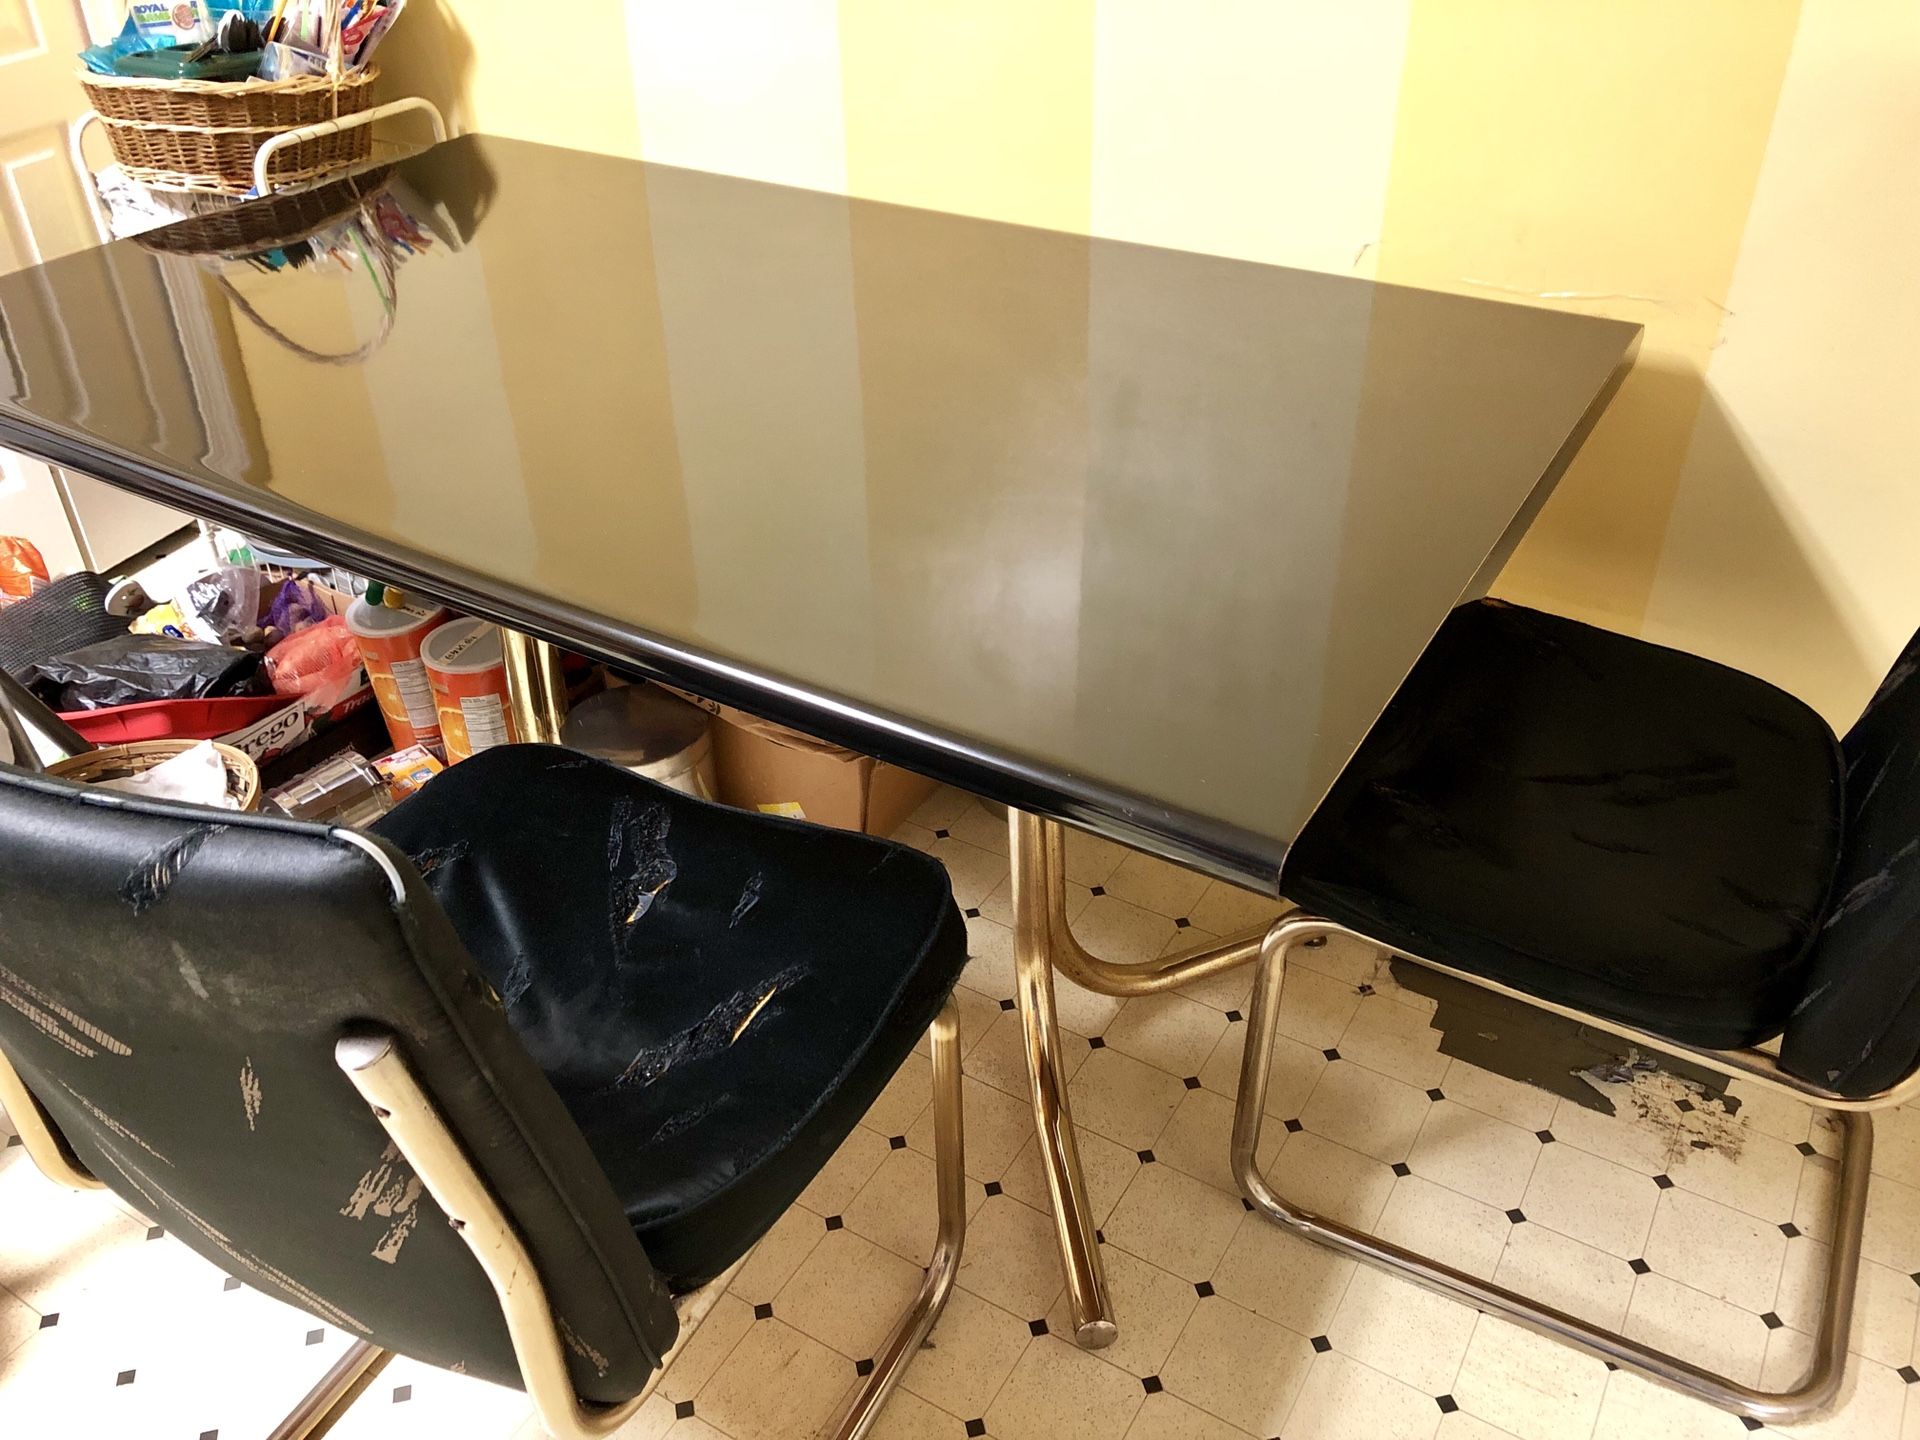 FREE kitchen table with 2 chairs, must go today